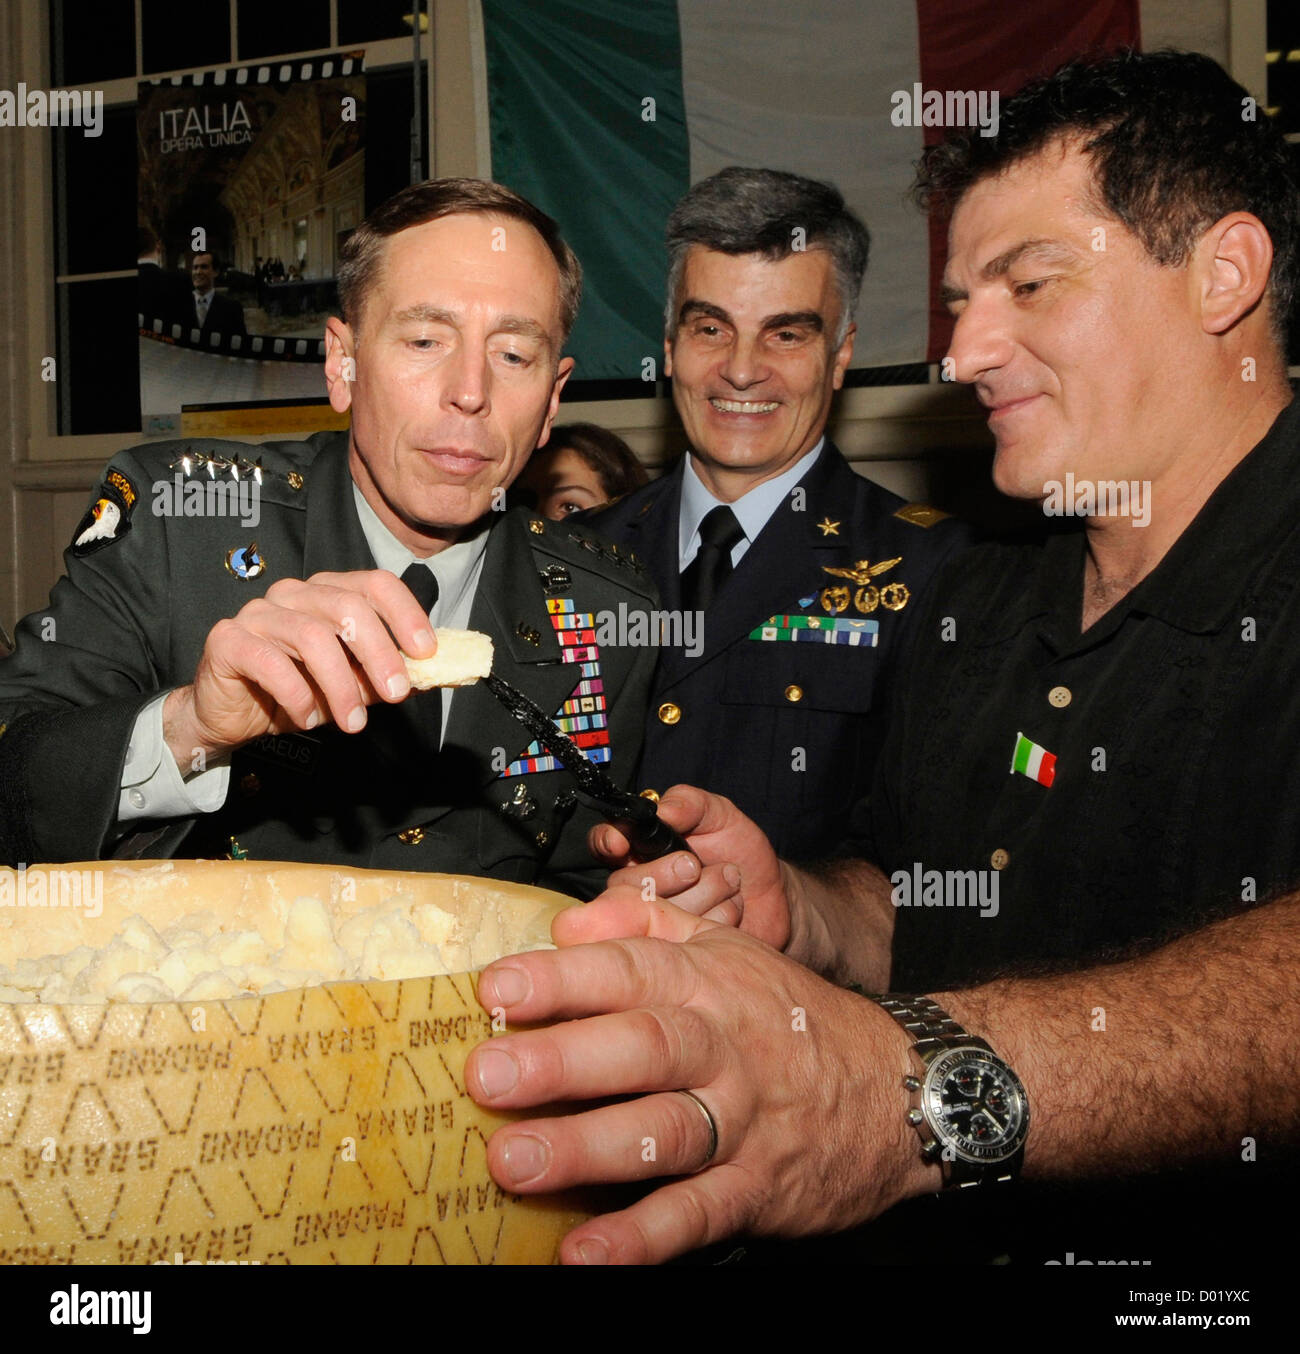 US Army General David Petraeus samples a piece of the Parmigiano-Reggiano cheese during International Night December 16, 2008 at MacDill AFB, FL. Petraeus resigned as Director of the CIA on November 9, 2012 after issuing a statement saying that he had engaged in an extramarital affair. Stock Photo